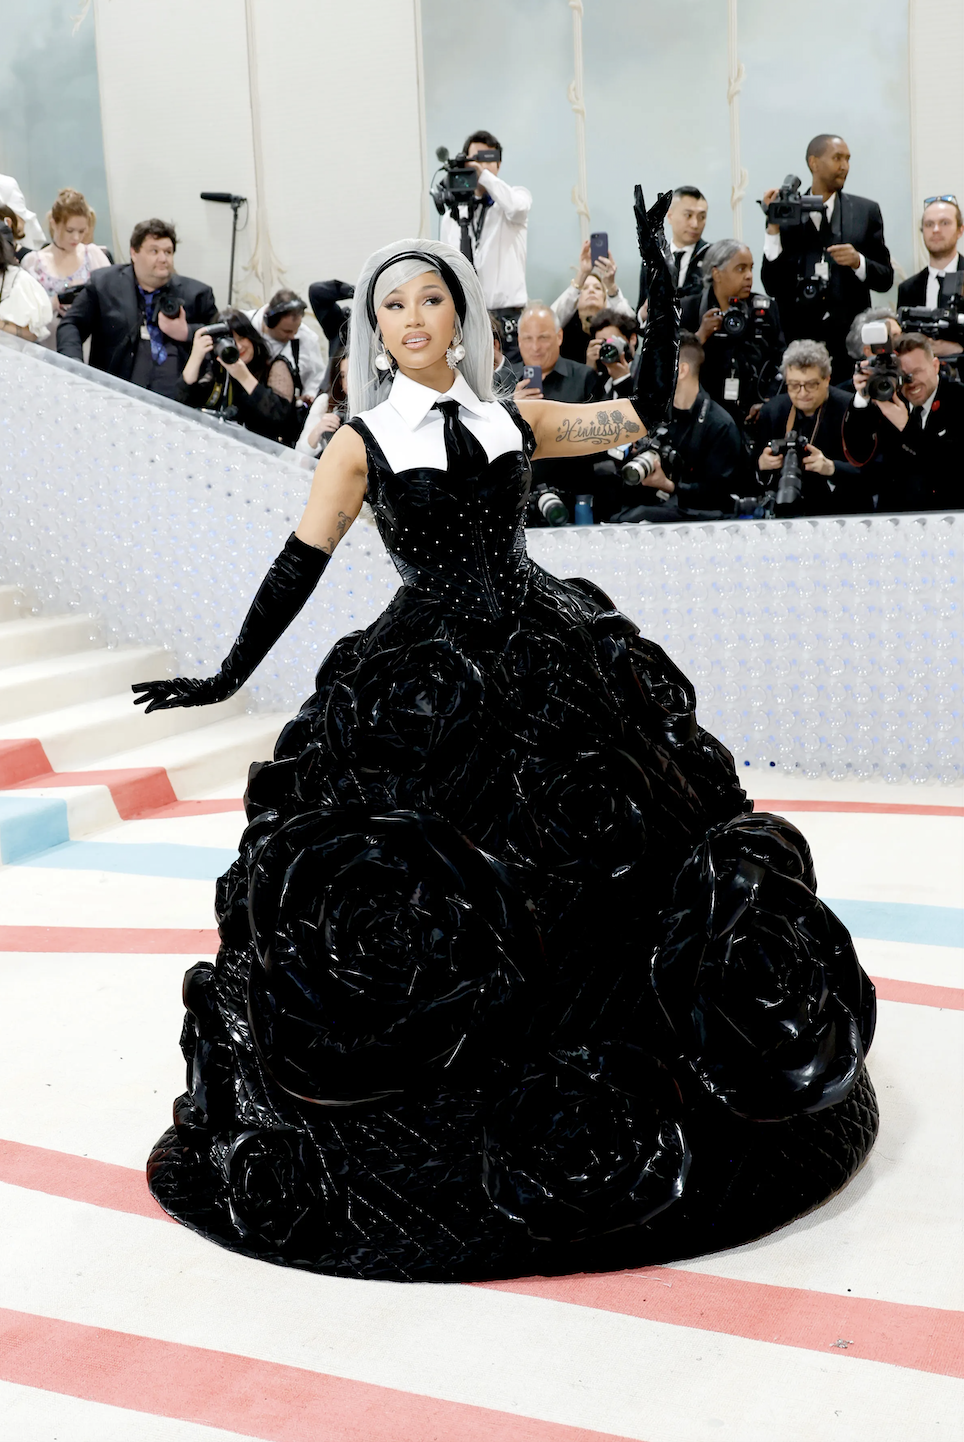 Met Gala 2023 recap: All the updates from the biggest night in fashion